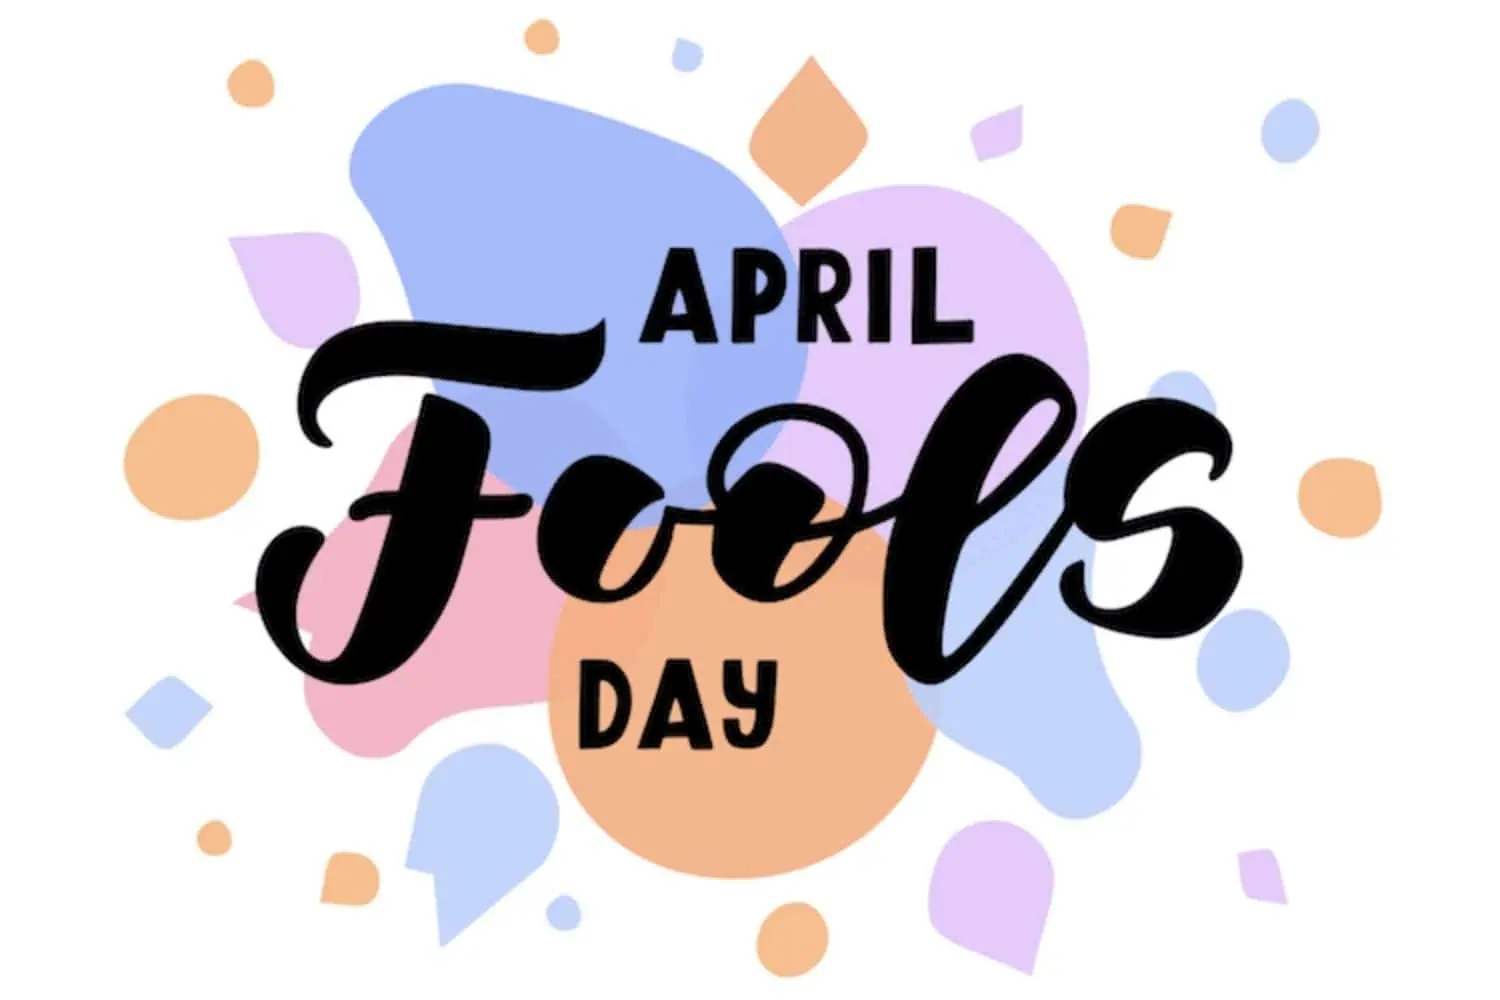 Have fun and celebrate April Fools' Day!